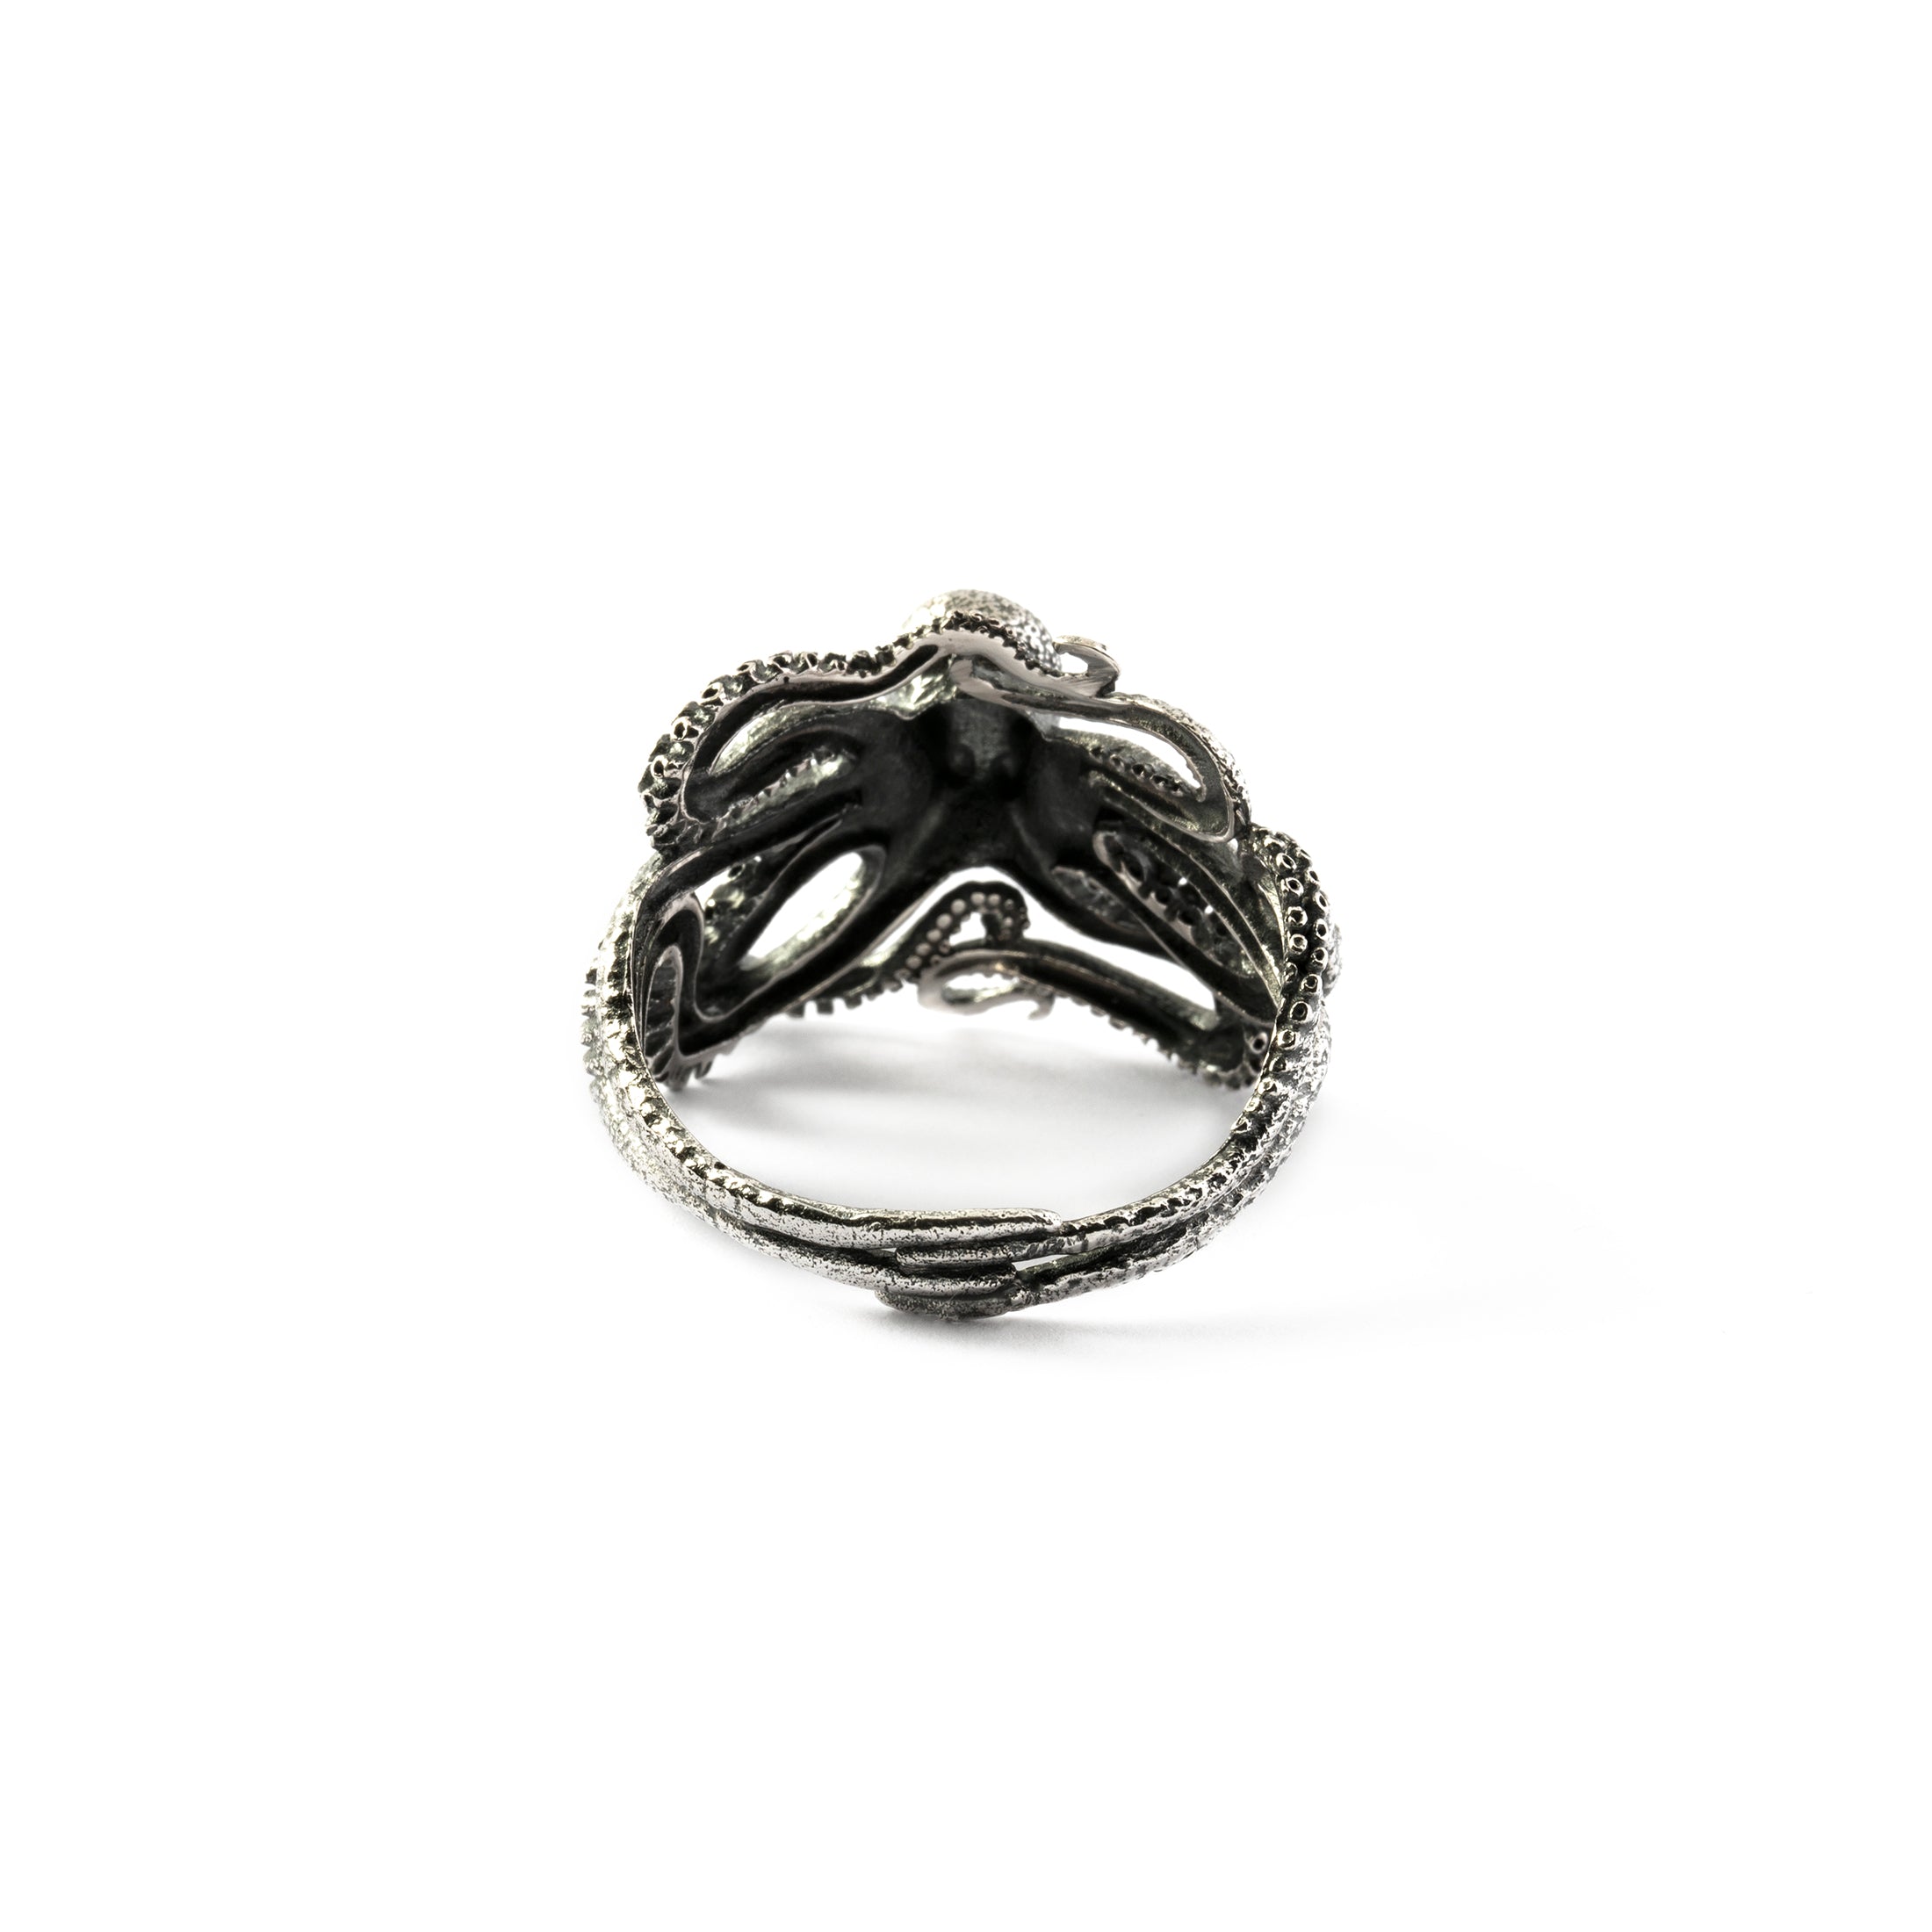 Octopus Silver Ring back side view